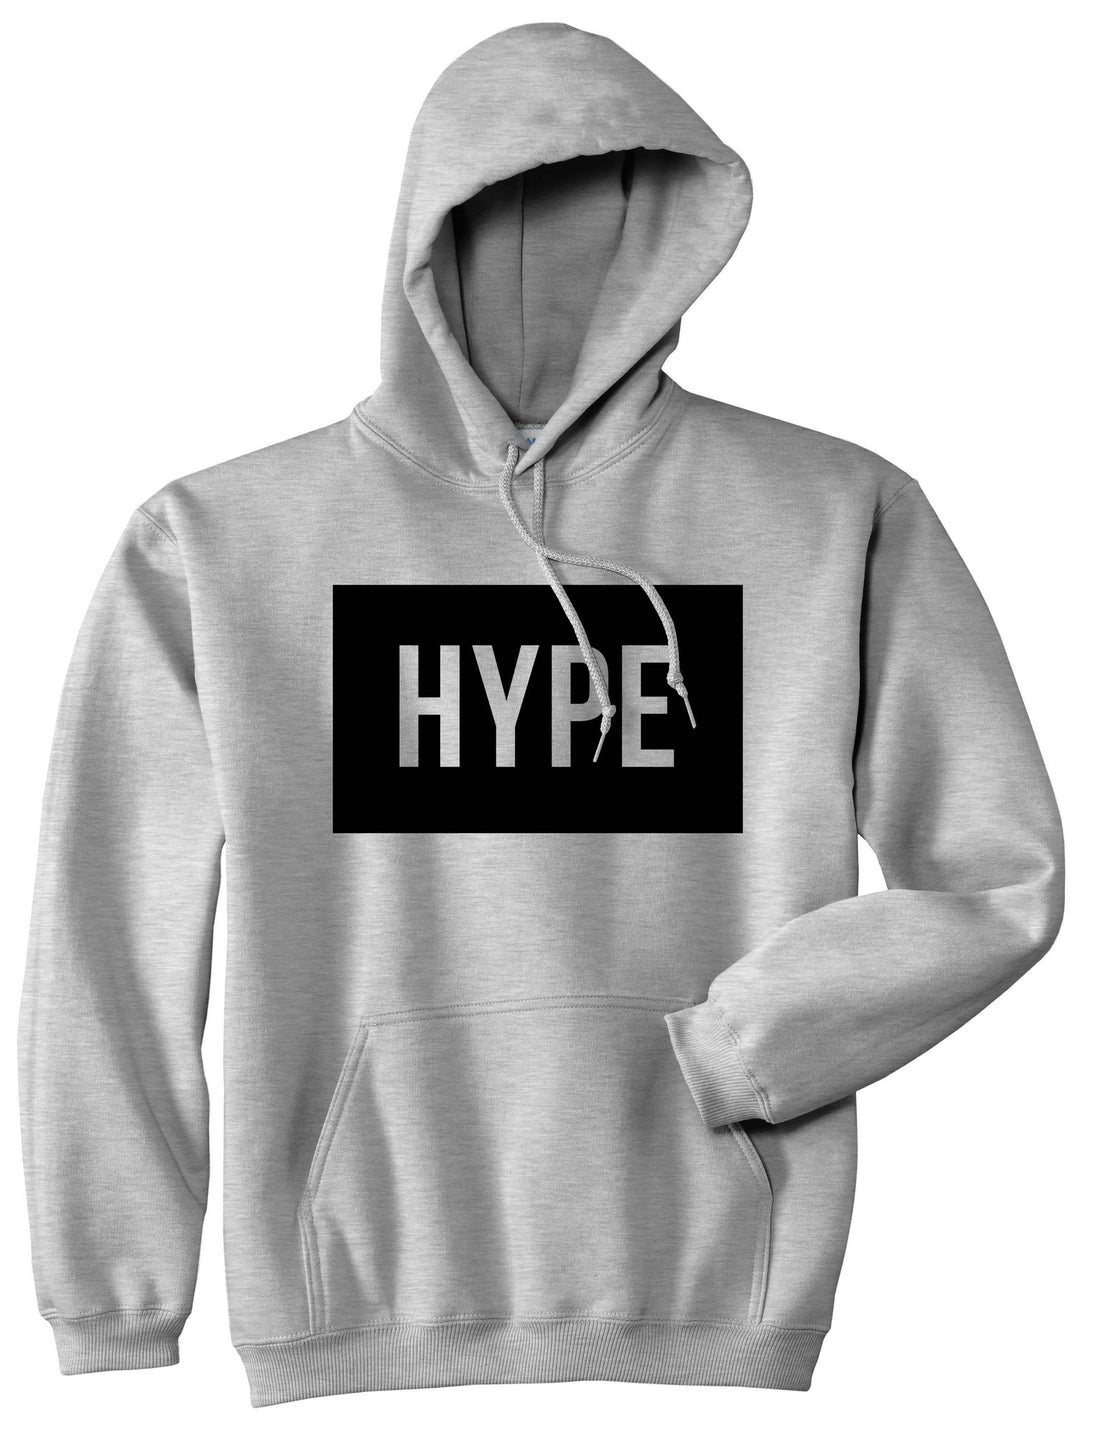 Hype Style Streetwear Brand Logo White by Kings Of NY Pullover Hoodie Hoody In Grey by Kings Of NY